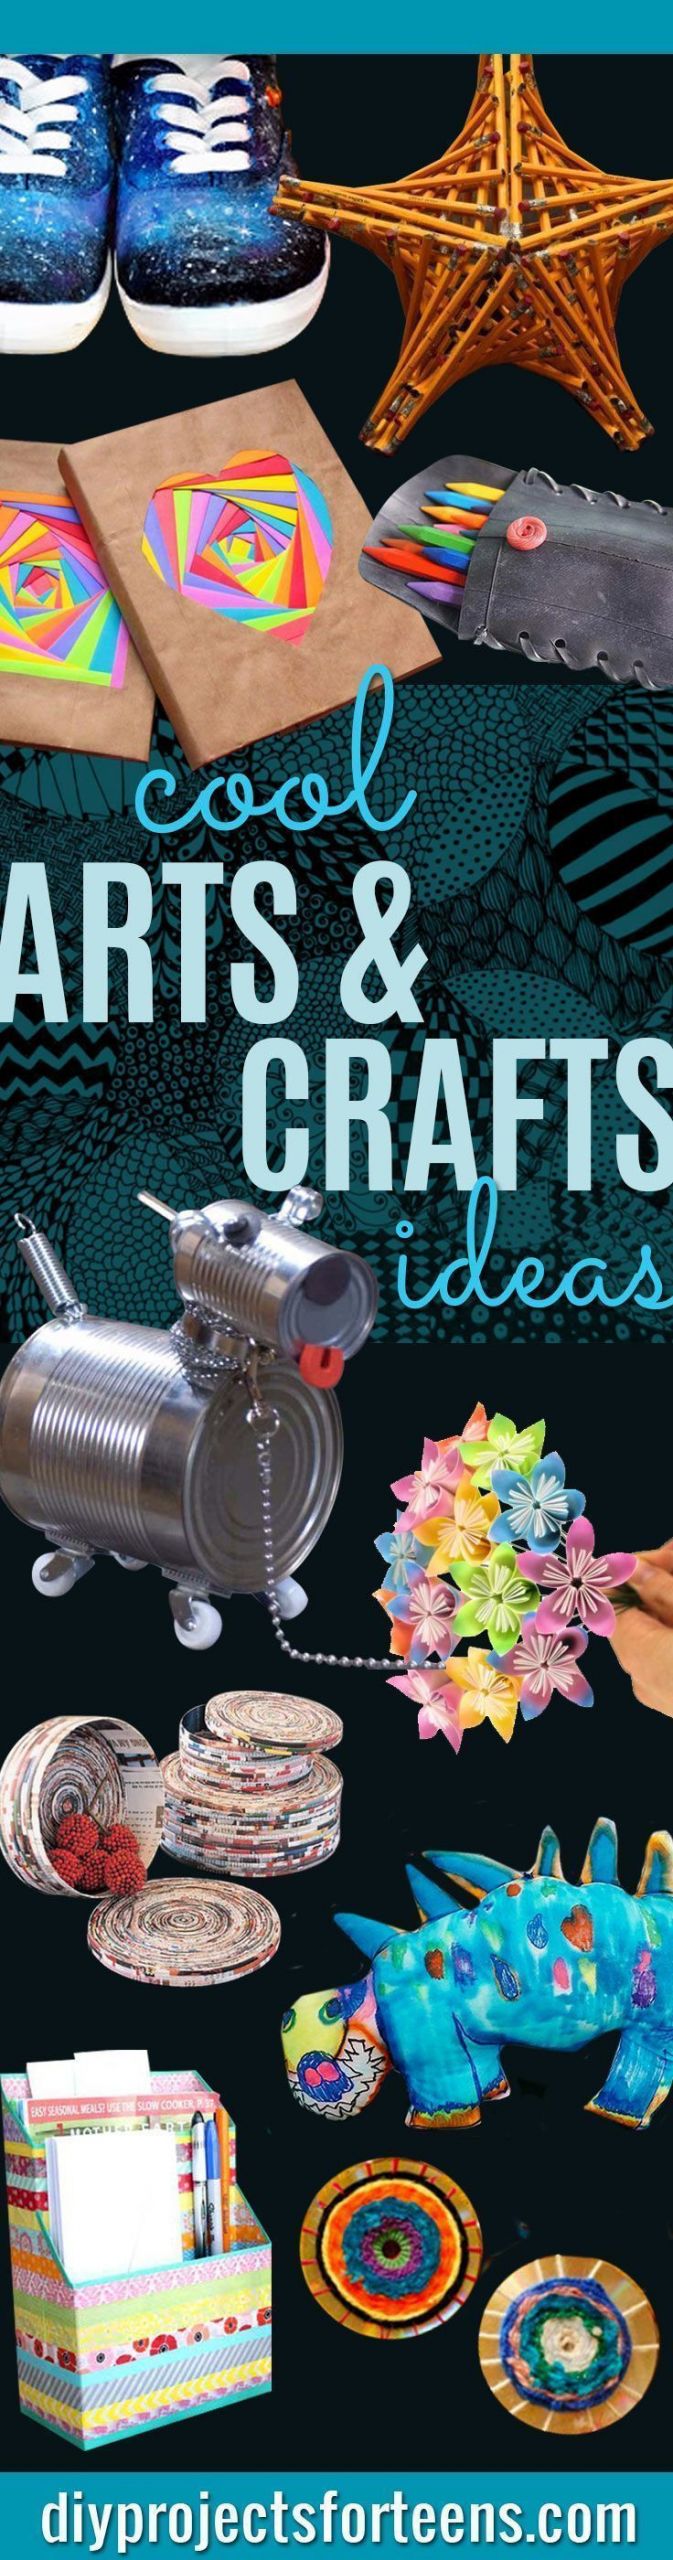 Craft Club Ideas For Adults
 284 best Pinterest Craft Club Ideas images on Pinterest